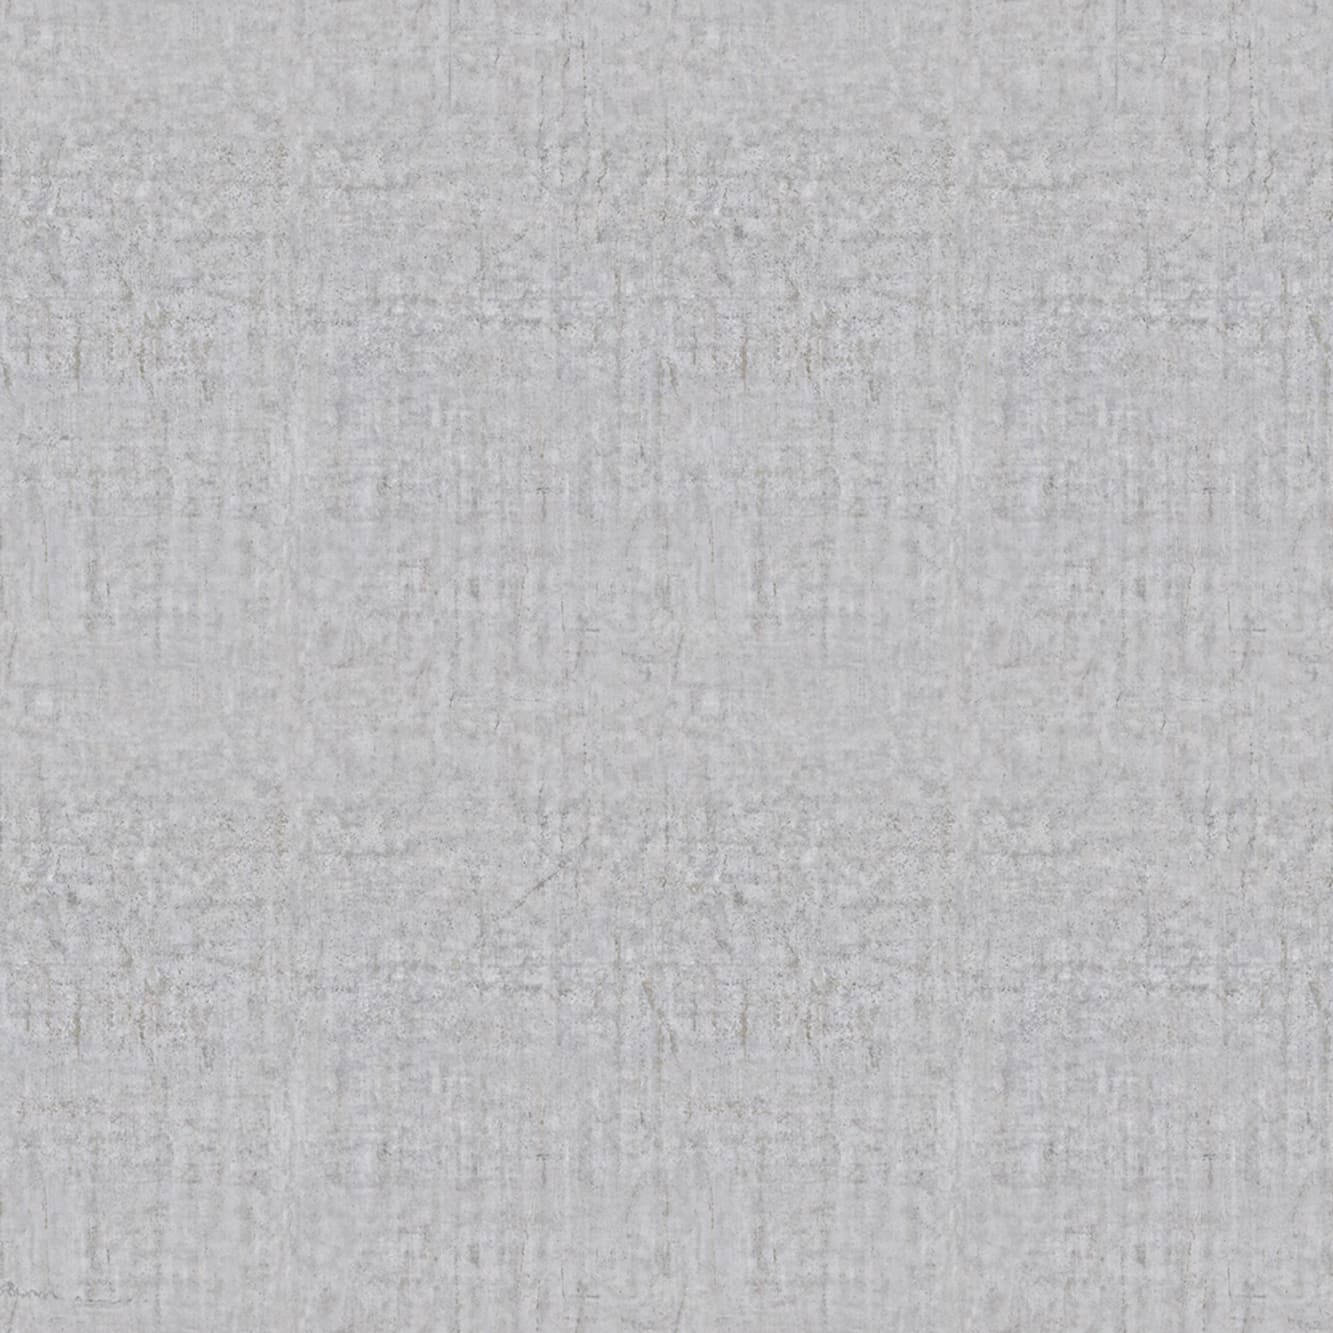 Light Gray Background With Abstract Texture Wallpaper